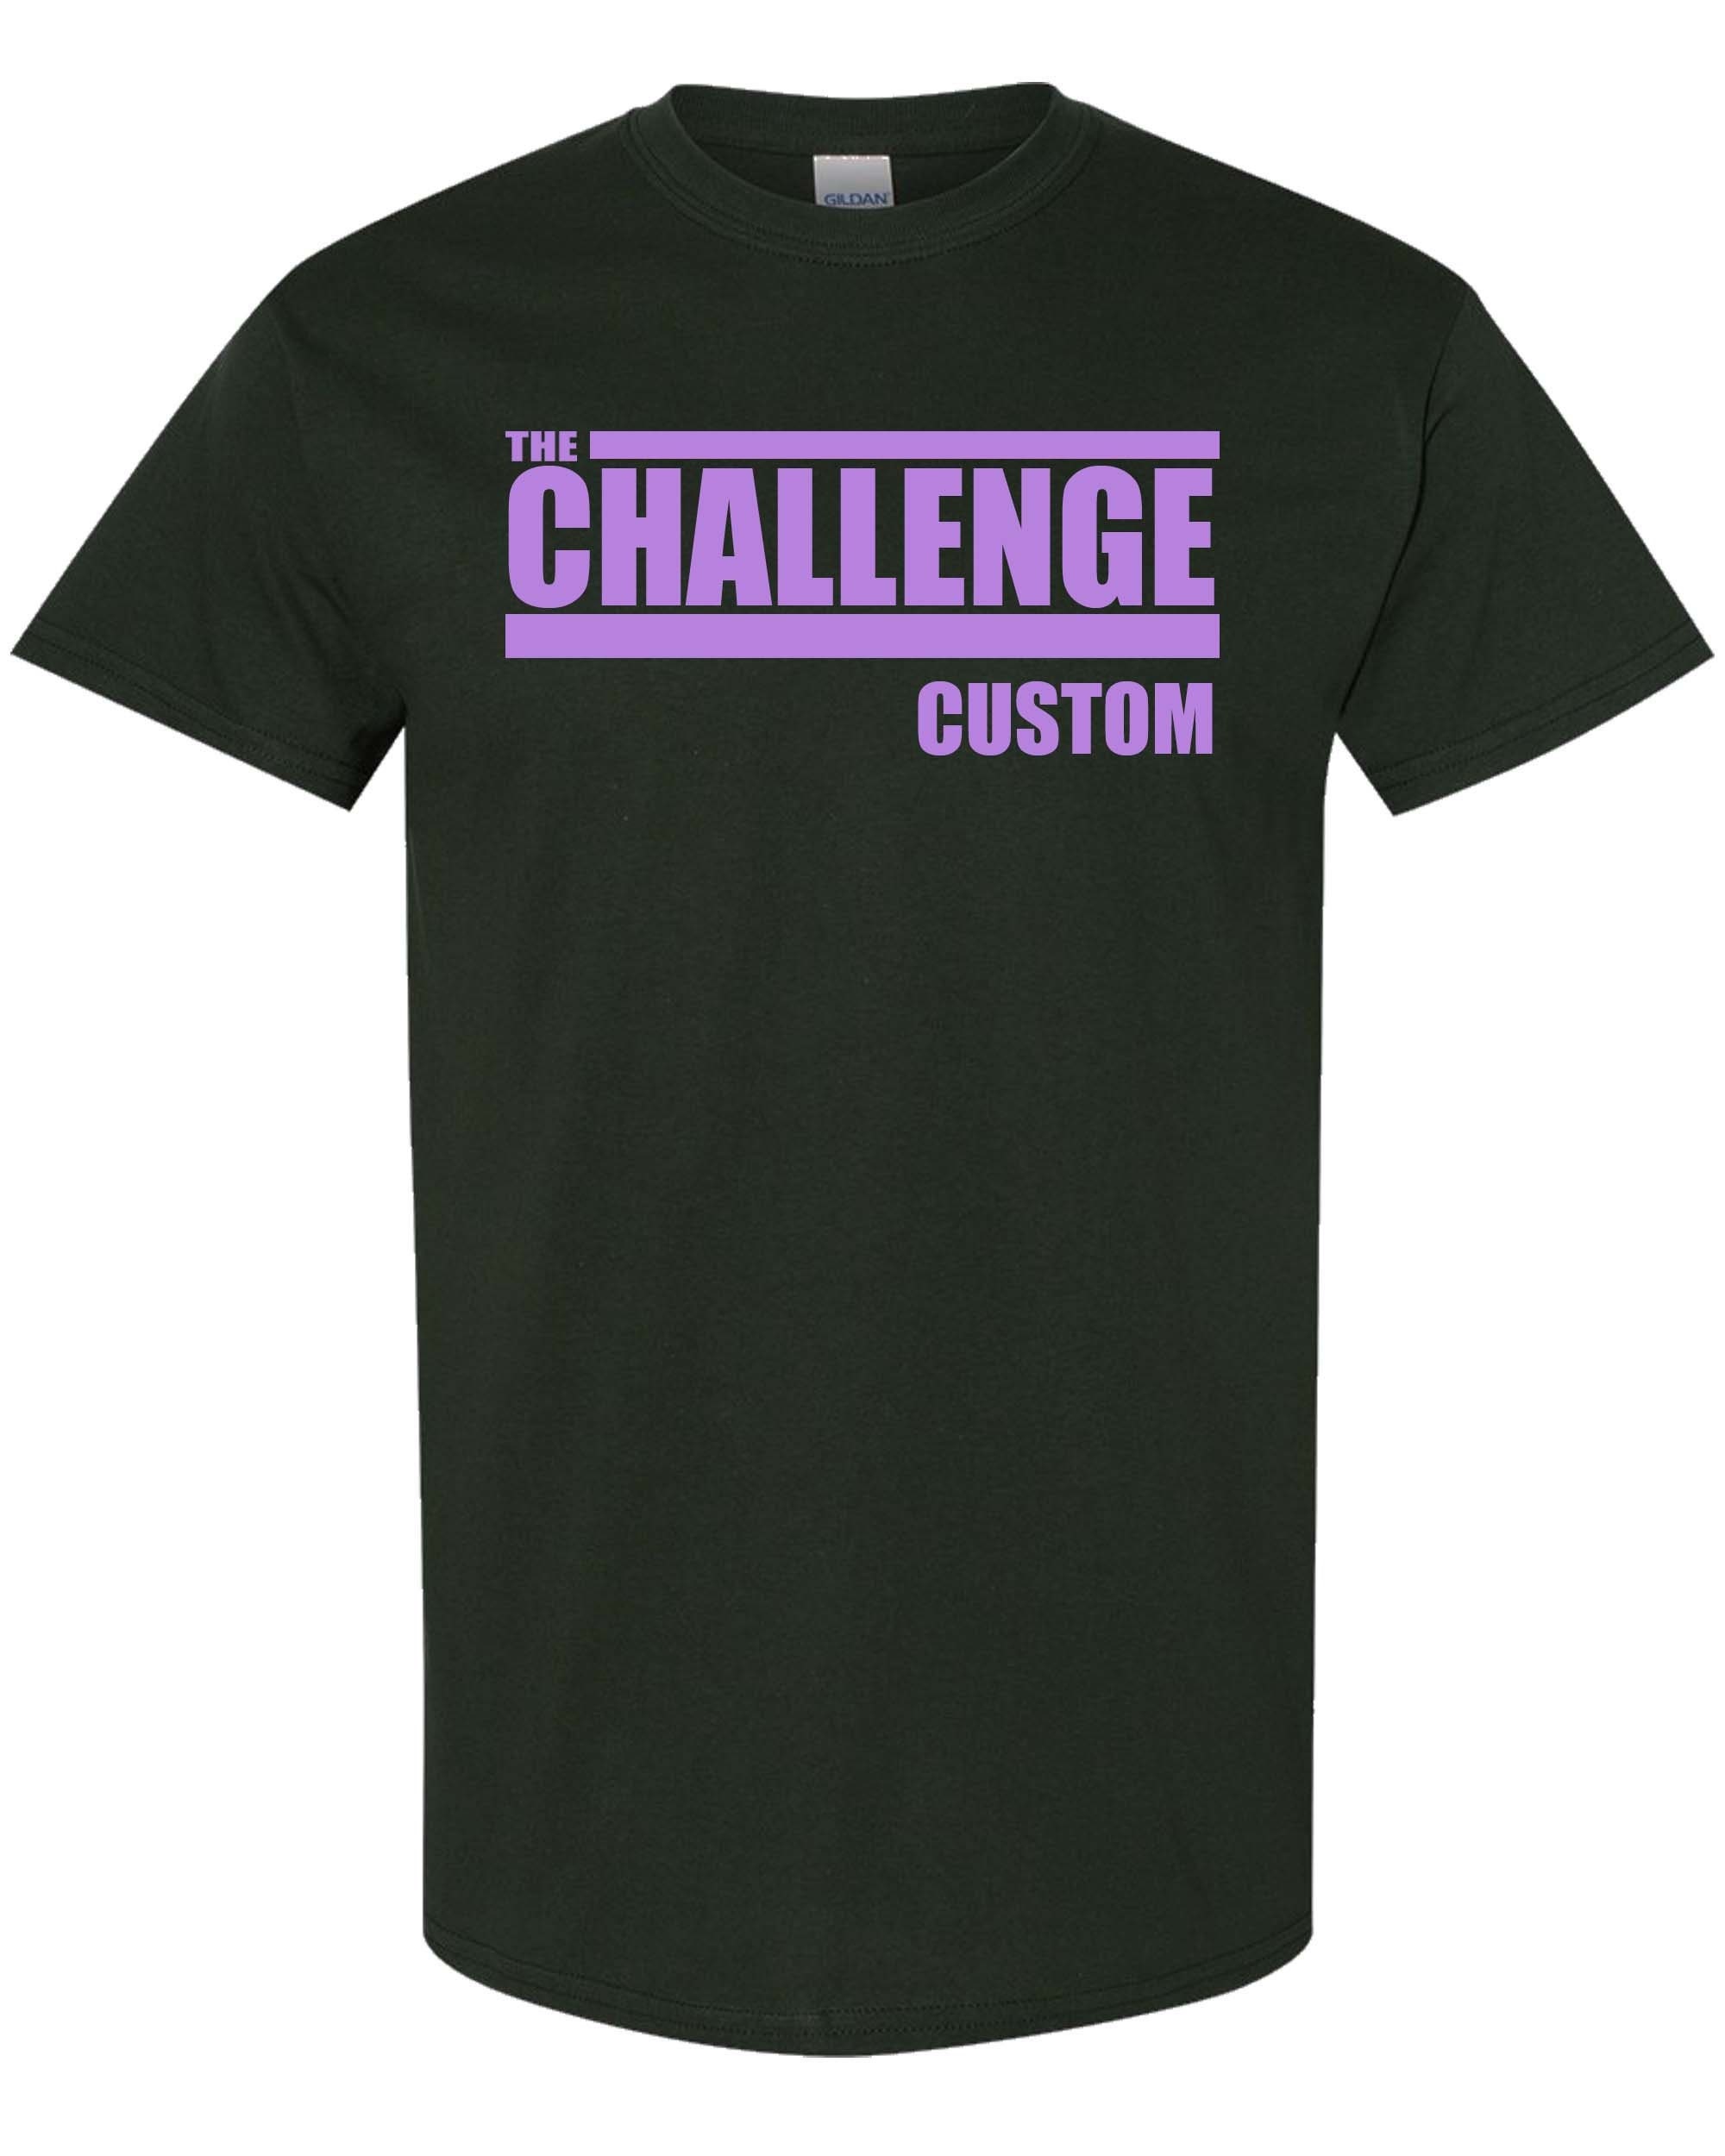 Discover The Challenge Seaon 38 Ride or Die Shirt Custom Name